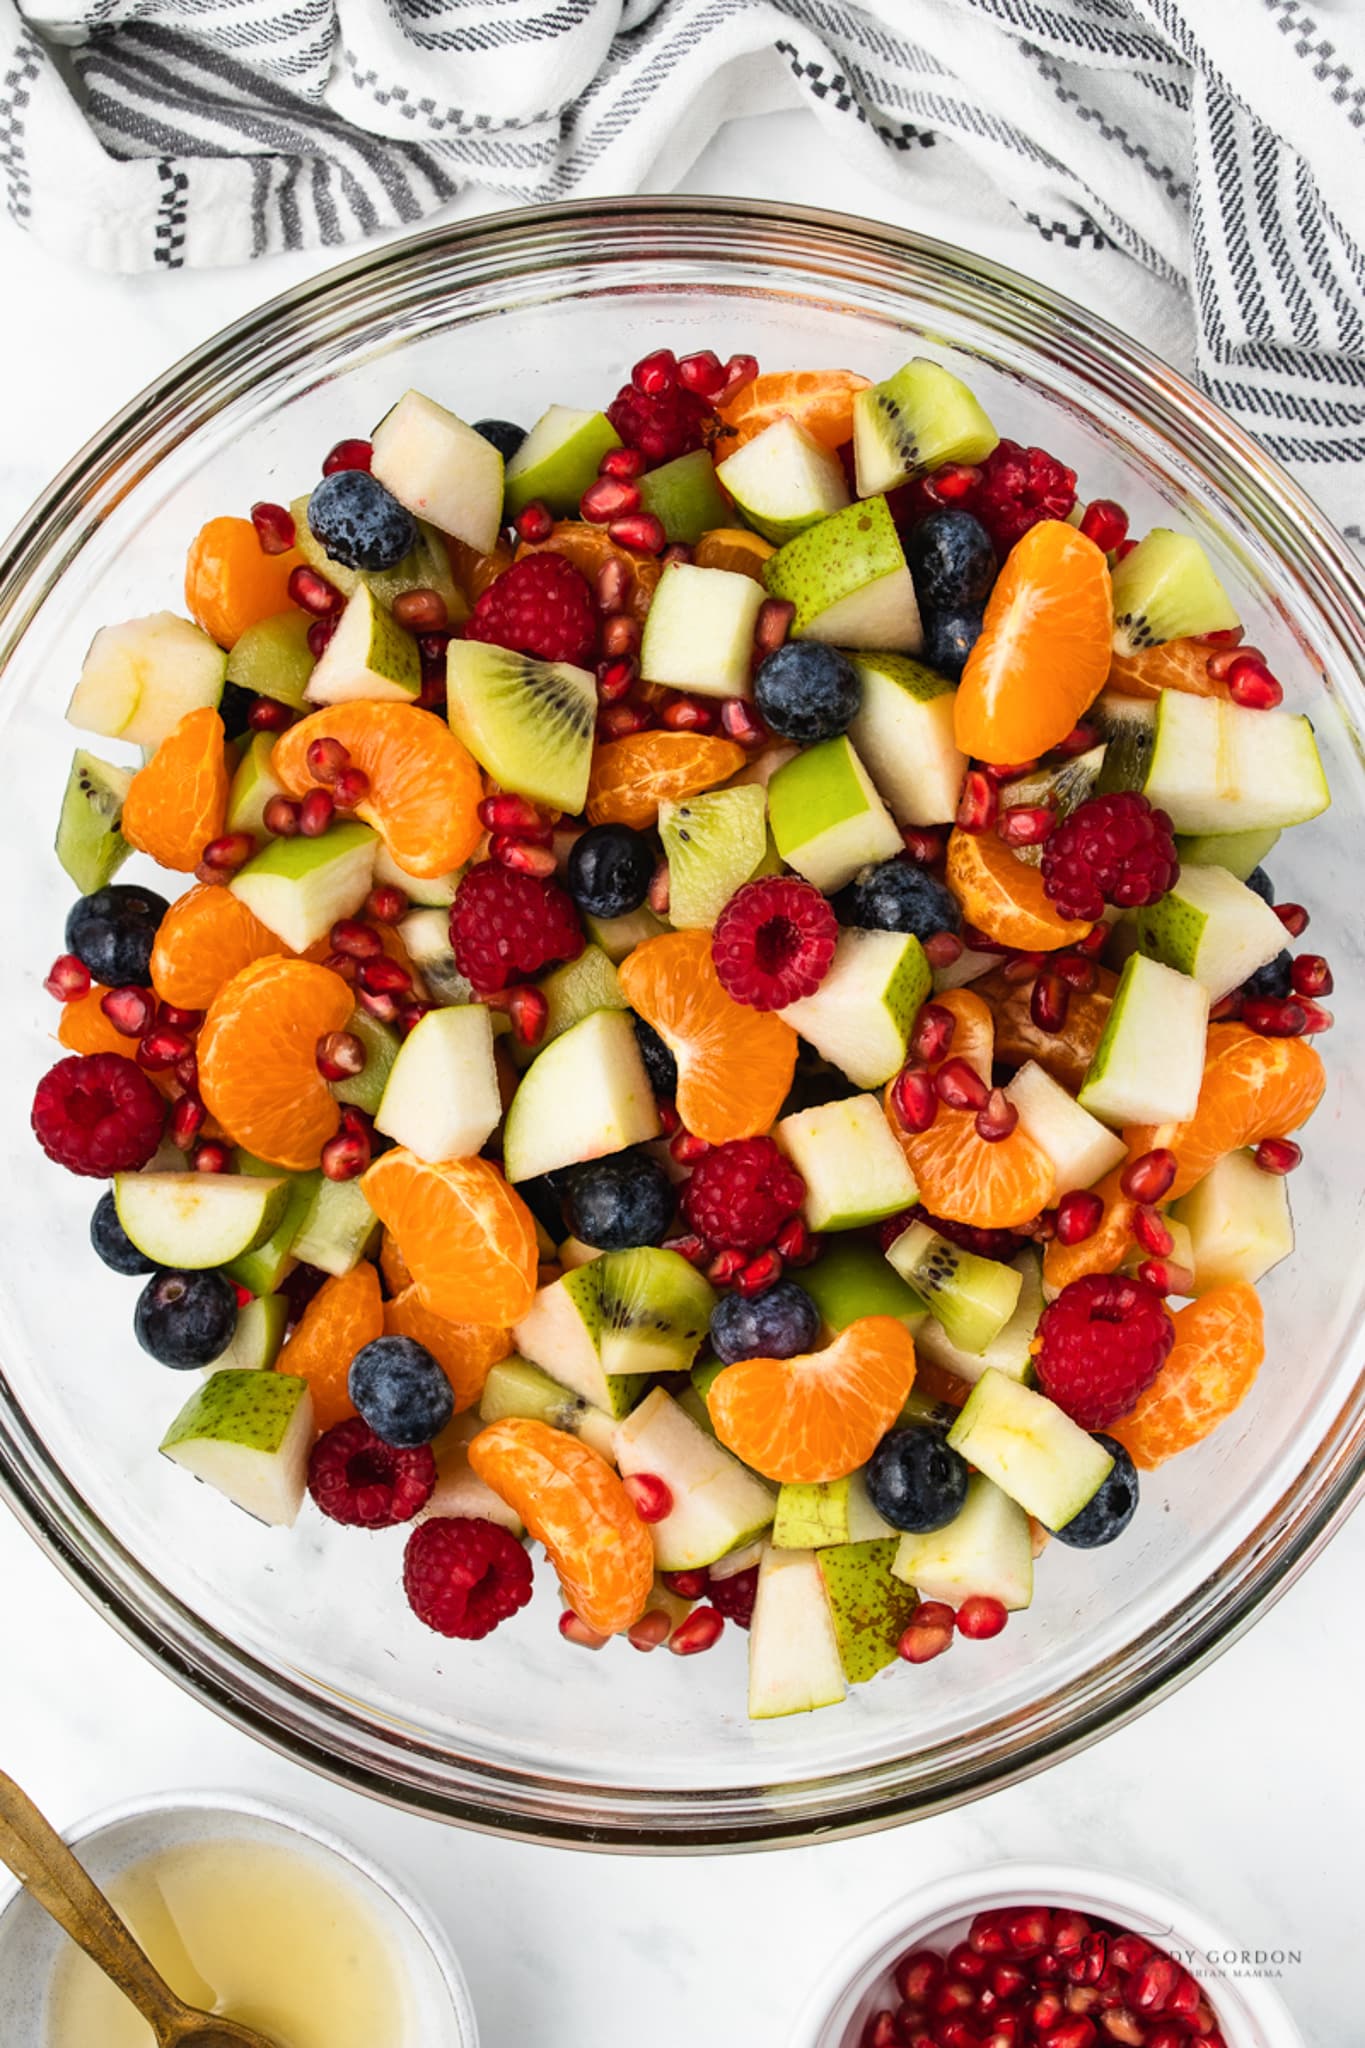 a clear glass bowl filled with fruit salad featuring clementines, green apples, and pomegranate seeds